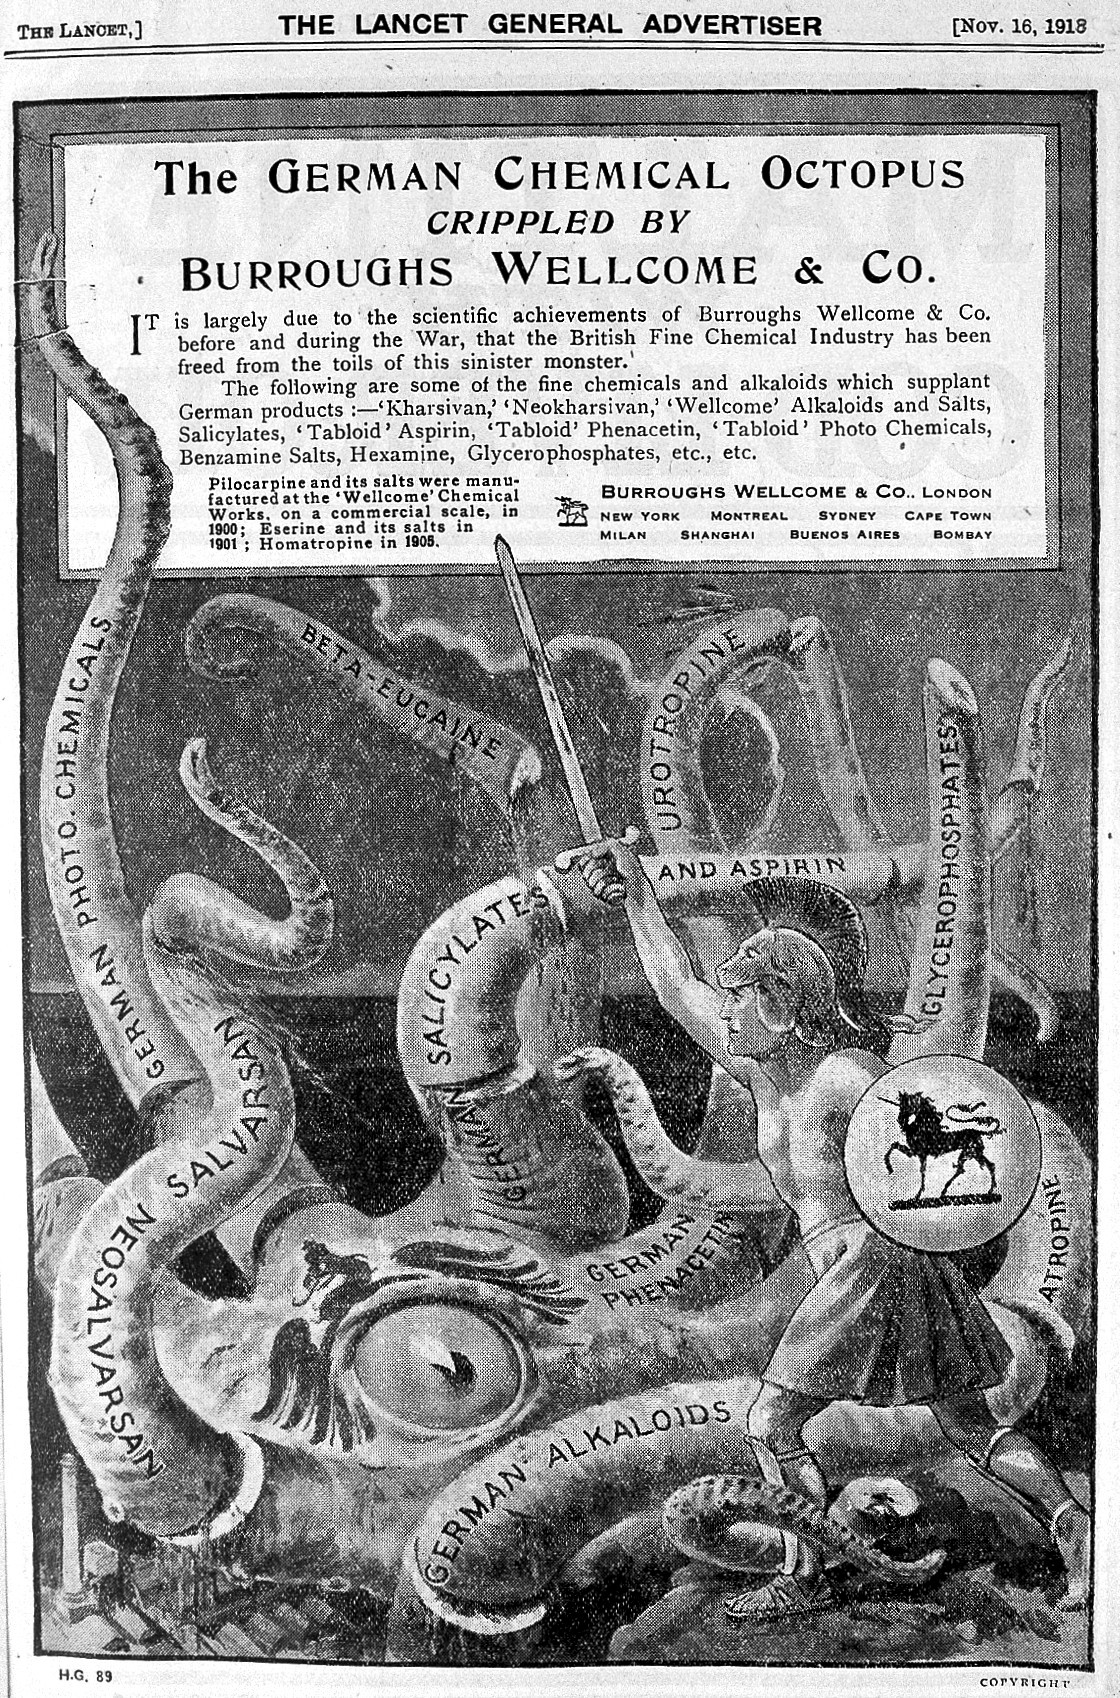 BW&Co. Anti-German War Propaganda. (Nov. 16, 1918). The German Chemical Octopus Crippled By Burroughs Wellcome & Co. The Lancet.